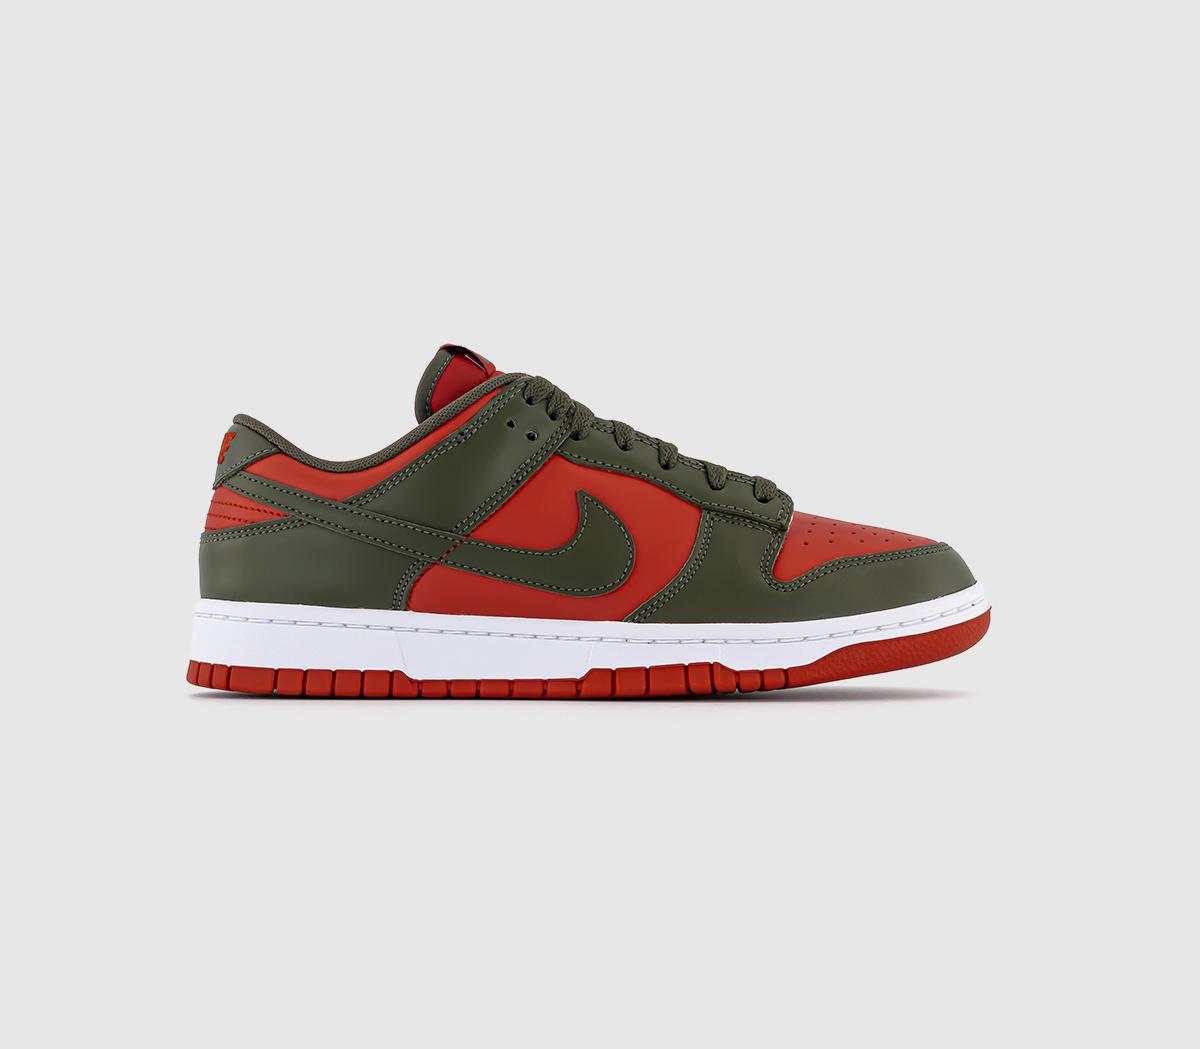 Nike Dunk Low Trainers Mystic Red Cargo Khaki Mystic Red White Cargo Kaha